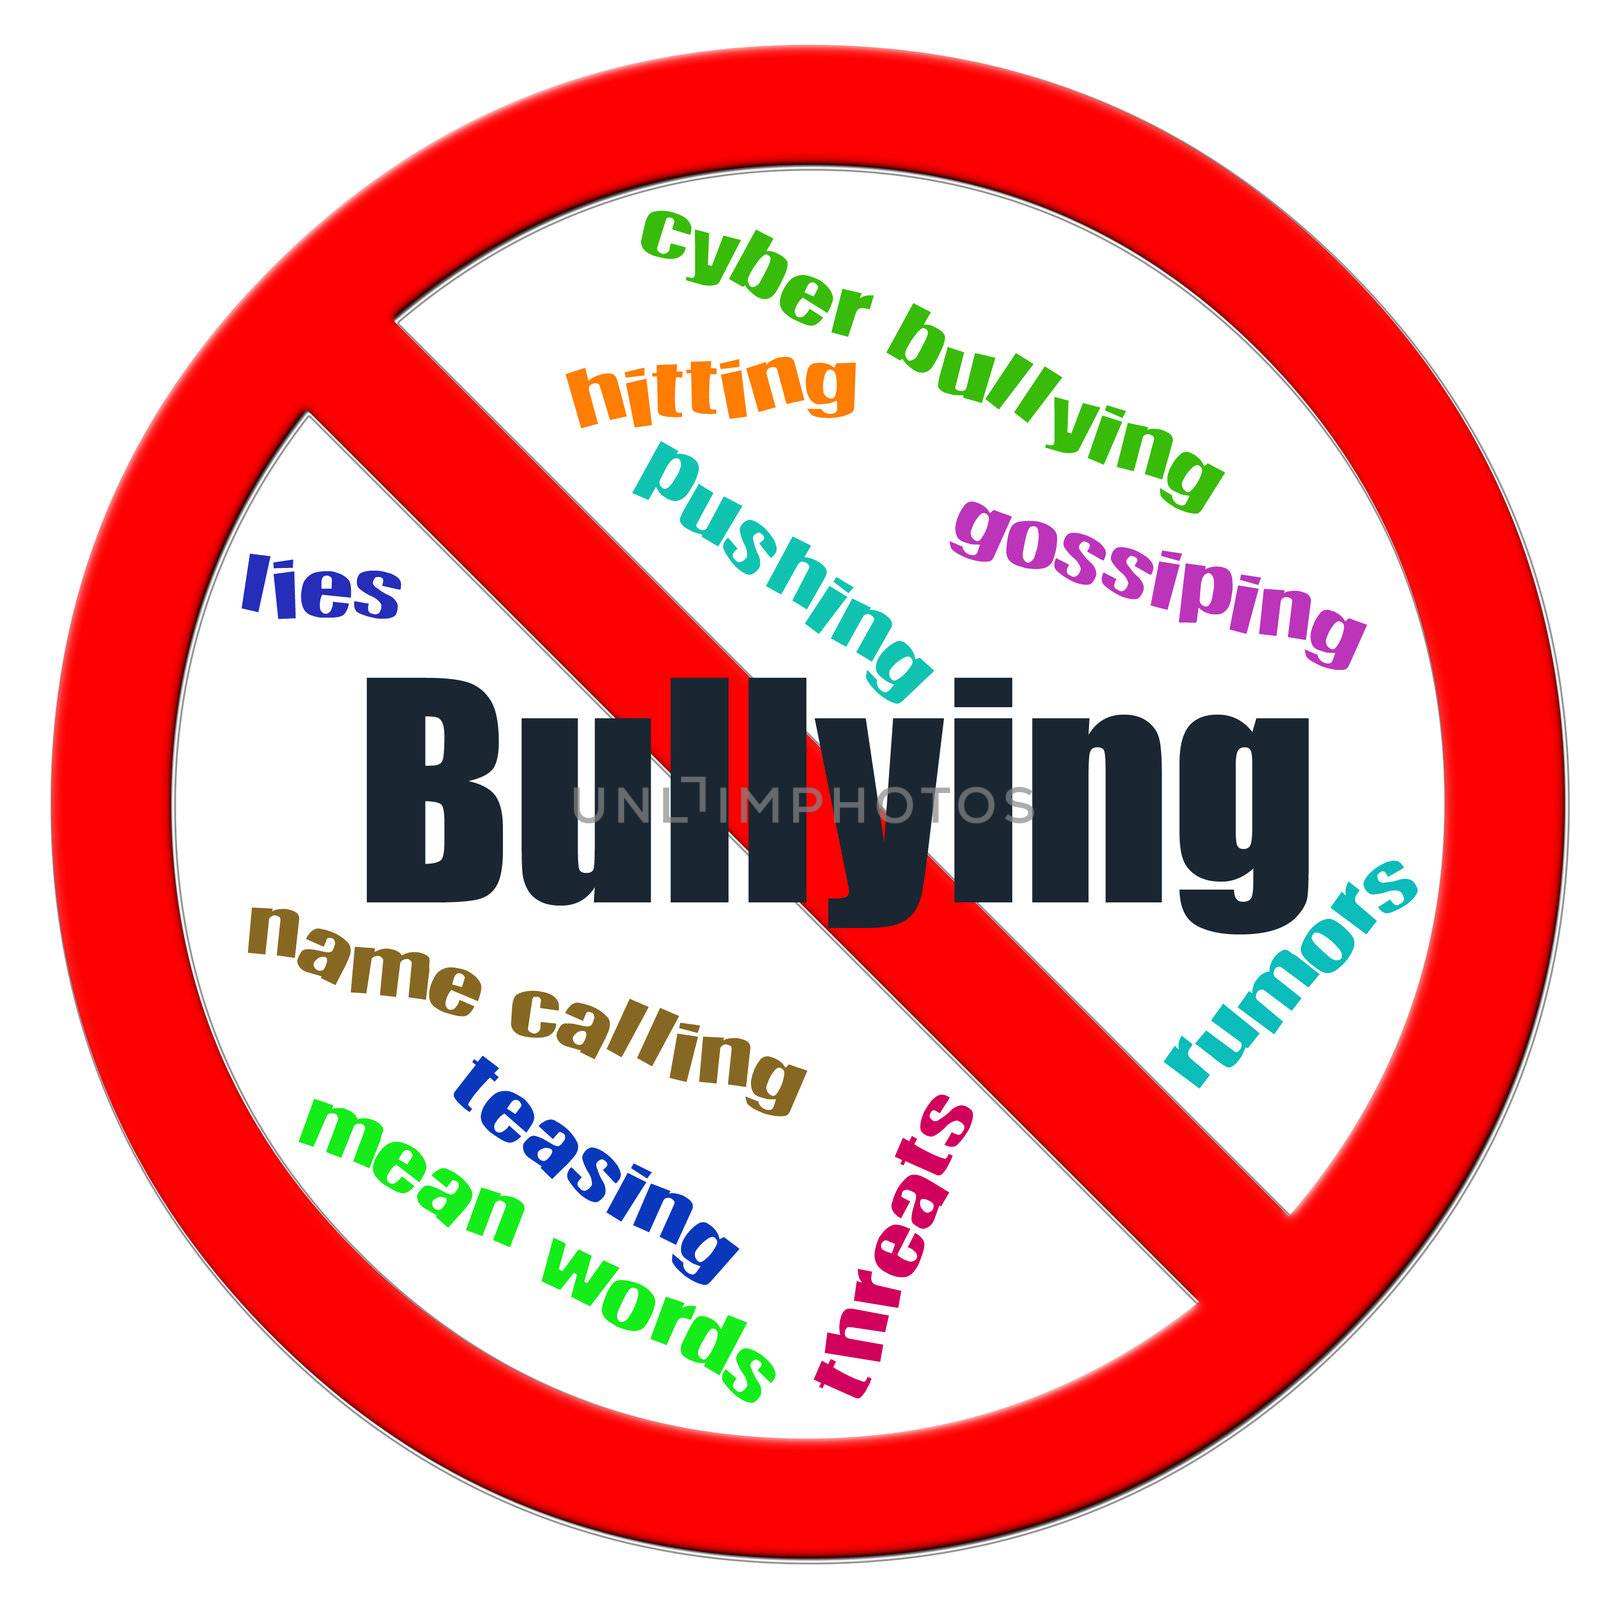 bullying and bullies must be stpped